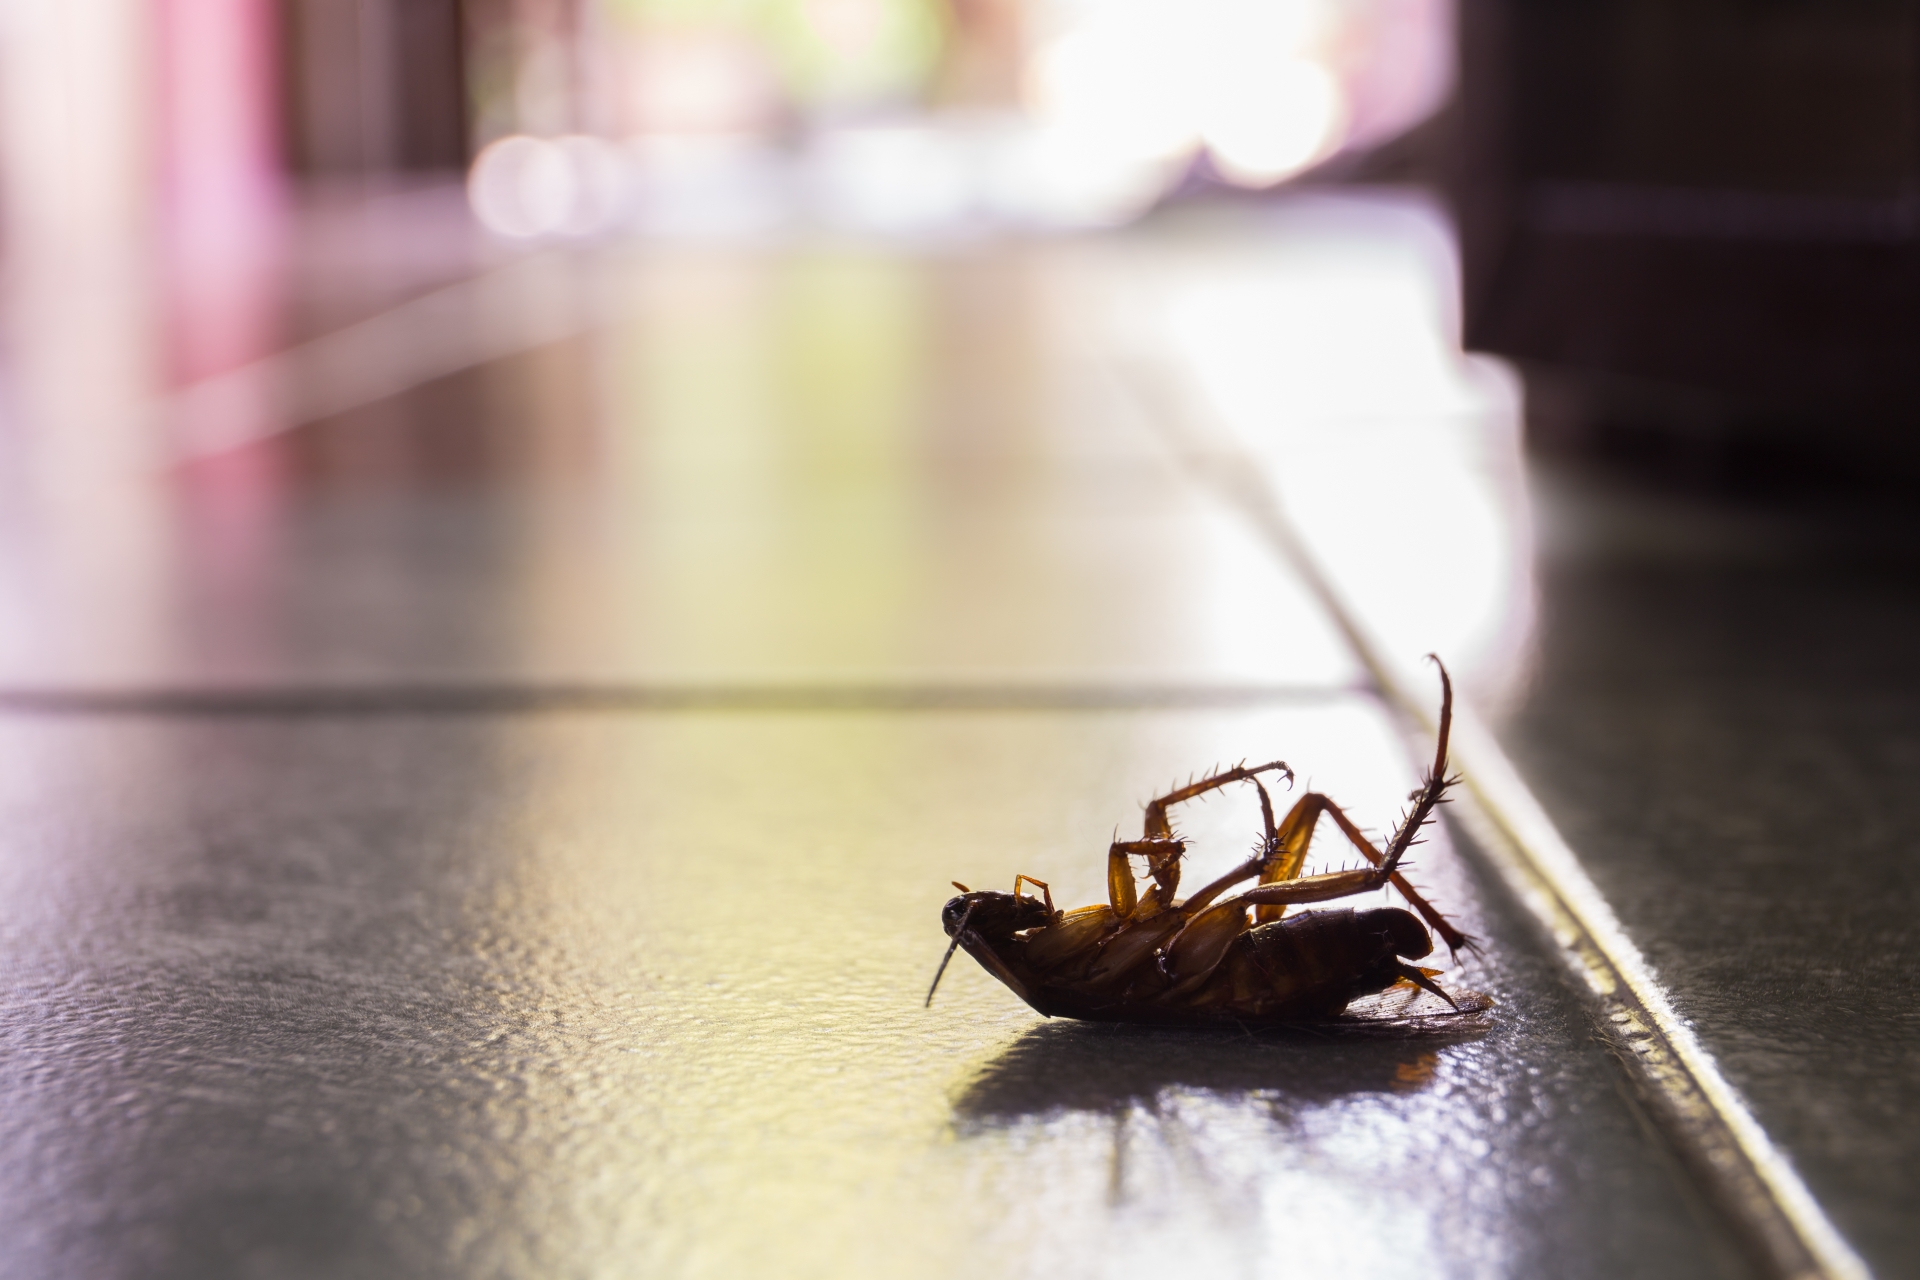 Cockroach Control, Pest Control in Northolt, UB5. Call Now 020 8166 9746